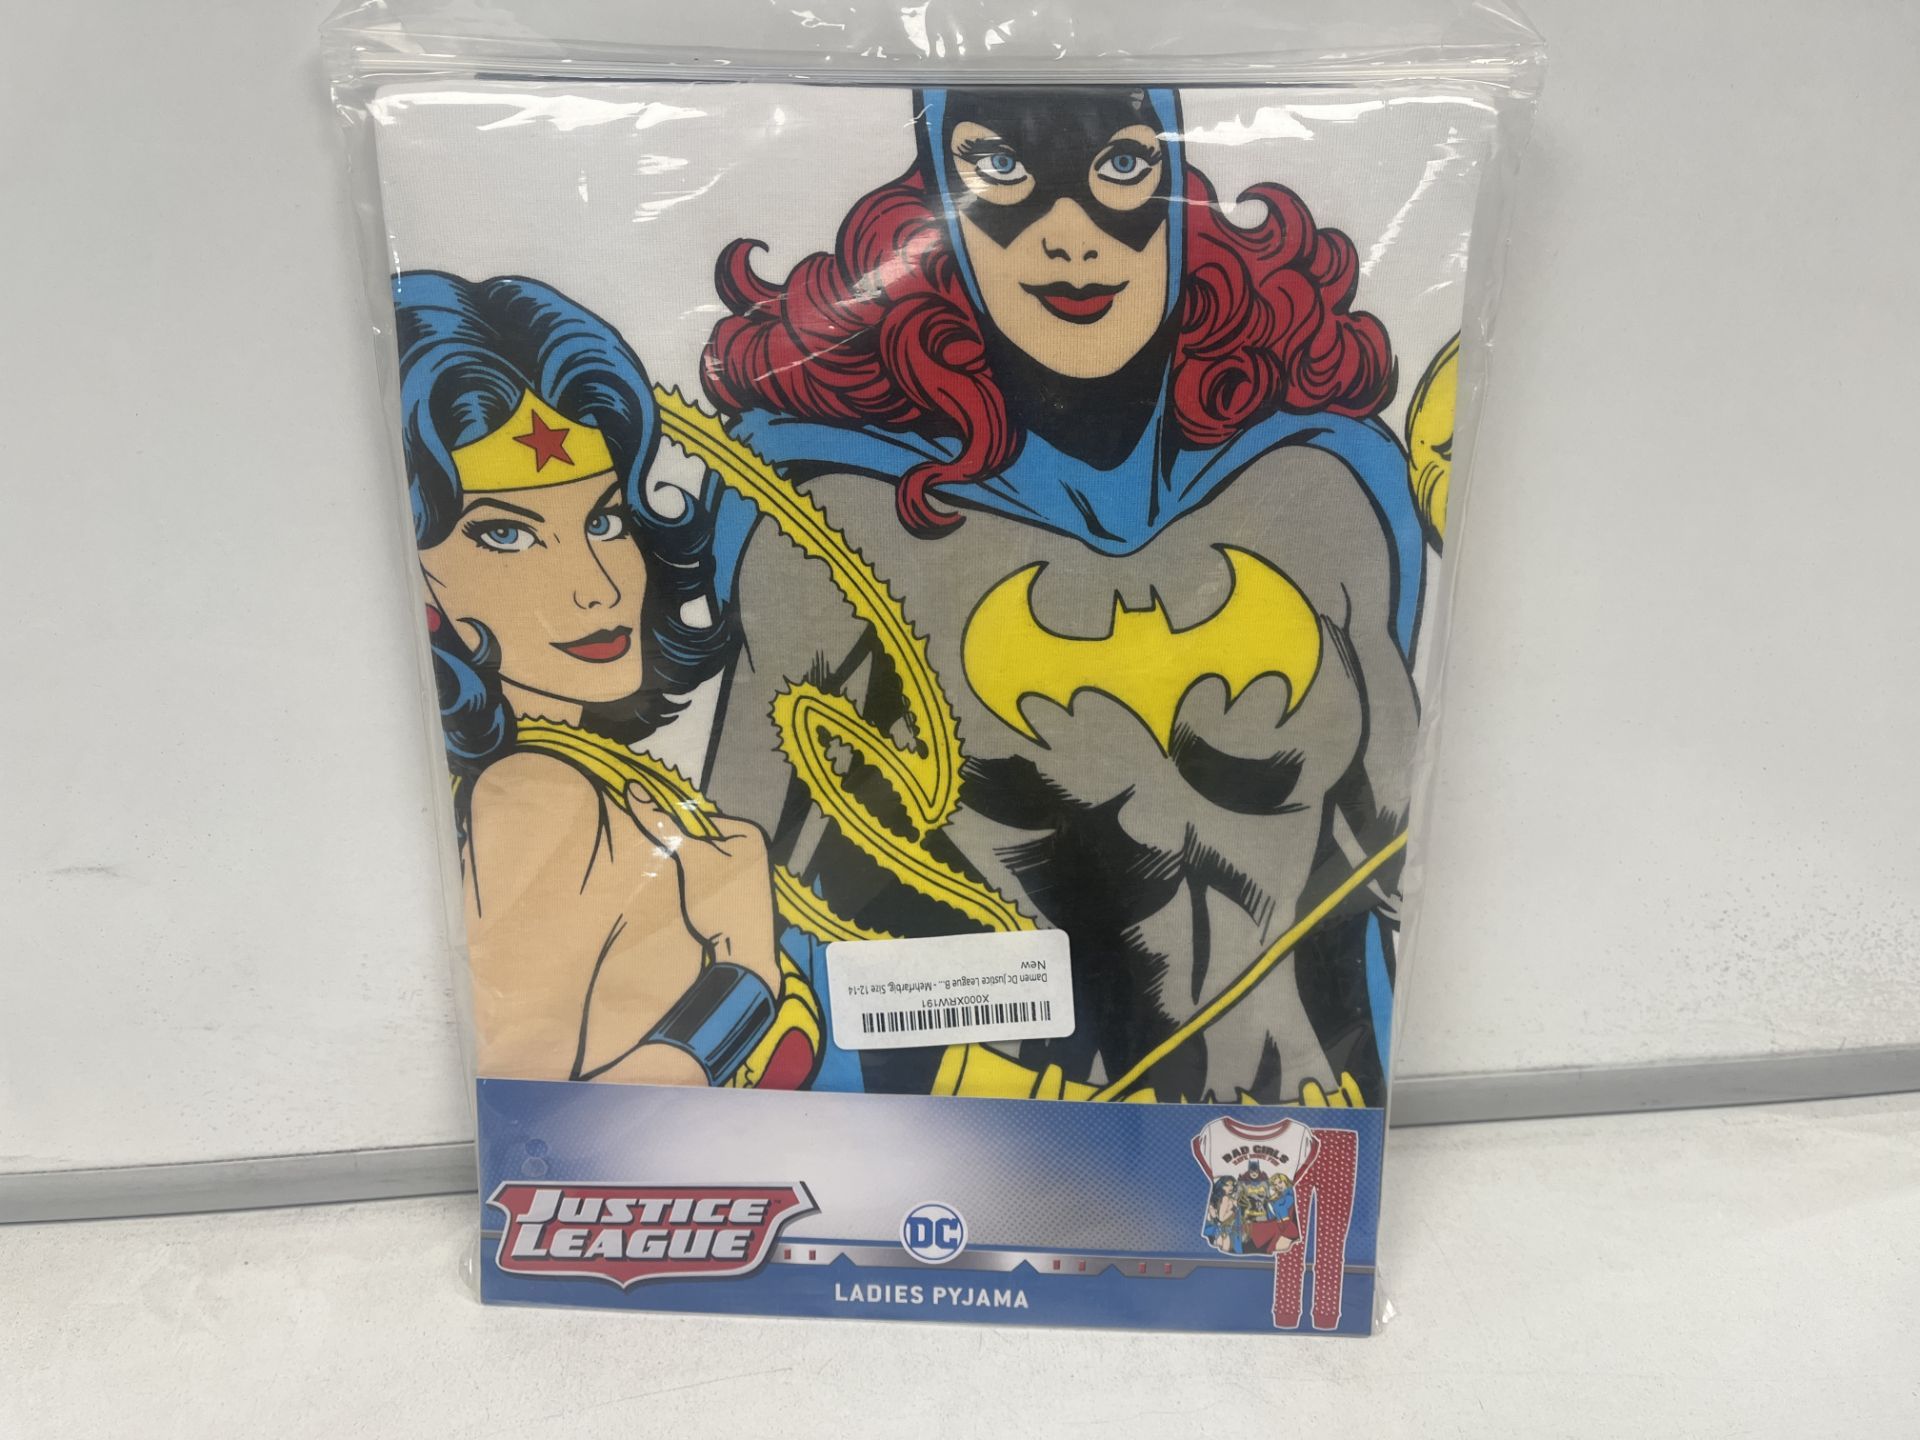 15 X BRAND NEW LADIES JUSTICE LEAGUE PJ SETS (SIZES MAY VARY) R9